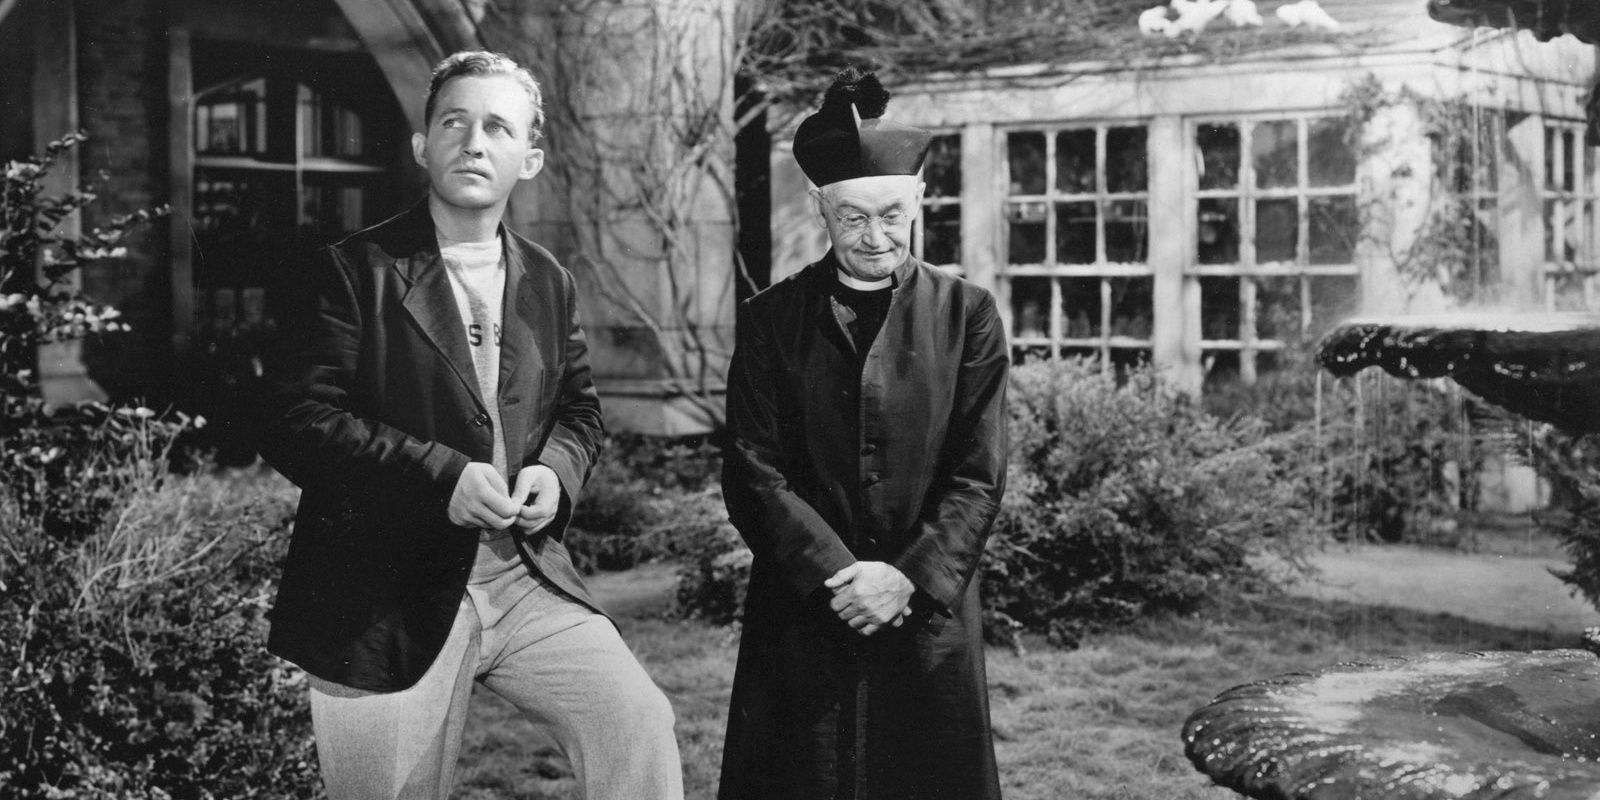 Bing Crosby plays a priest in Bells of St. Mary's